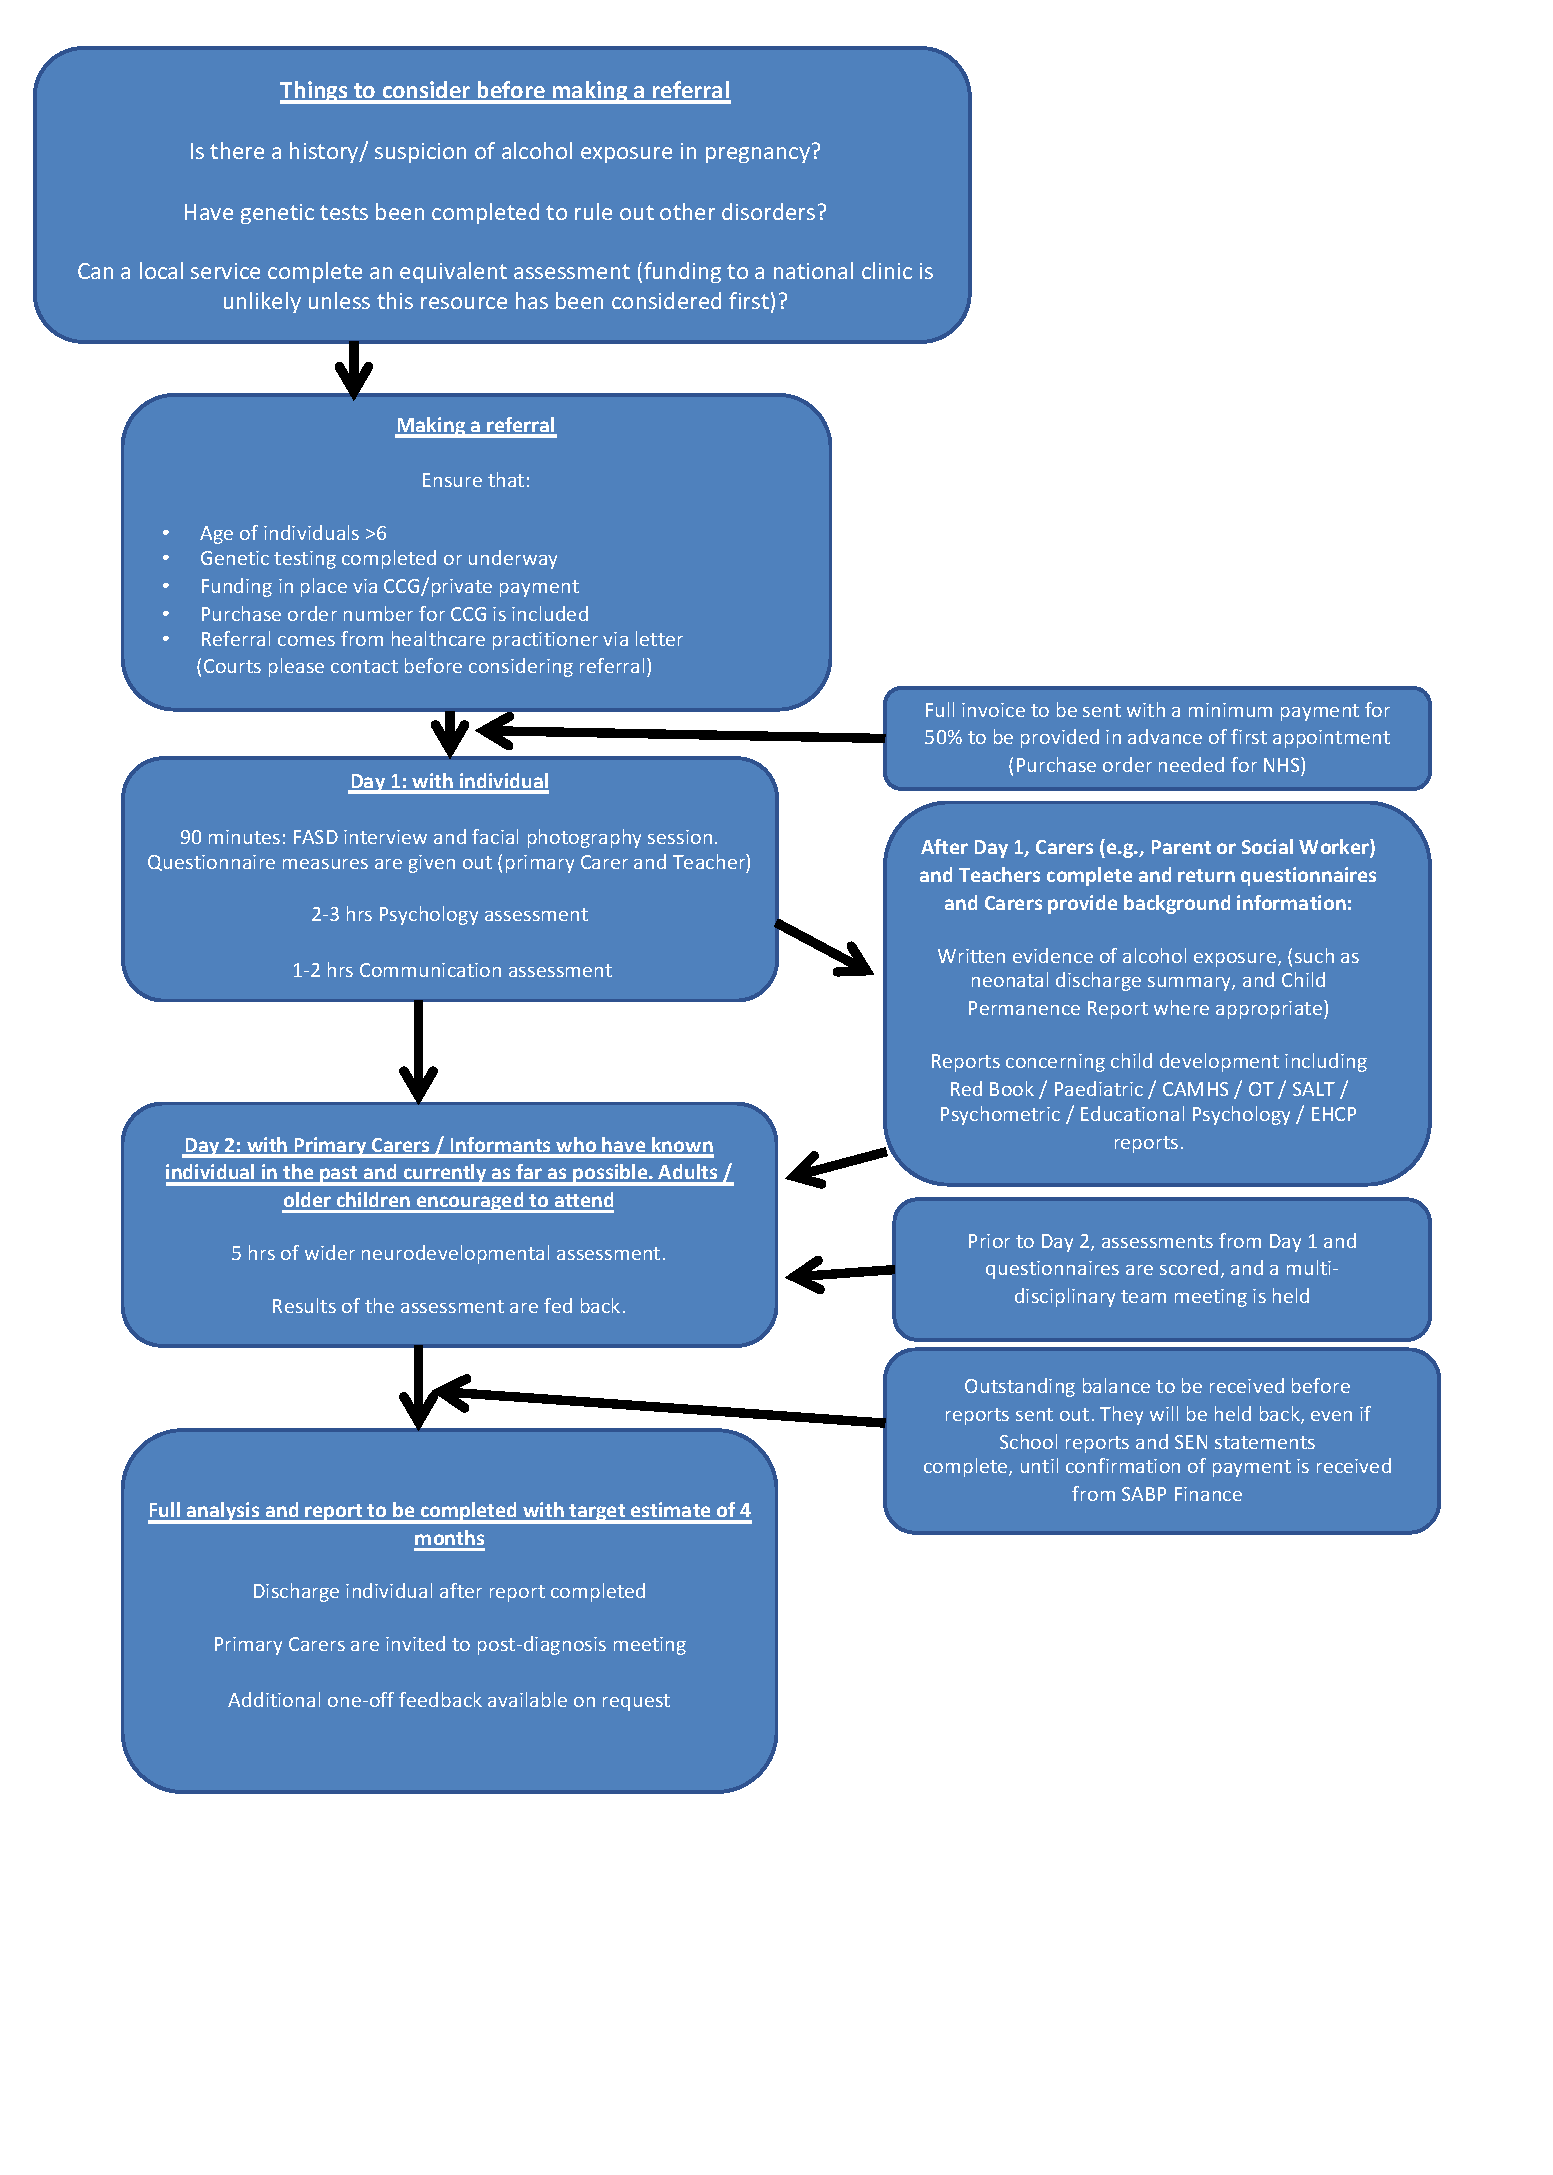 FASD Updated referral pathway.png